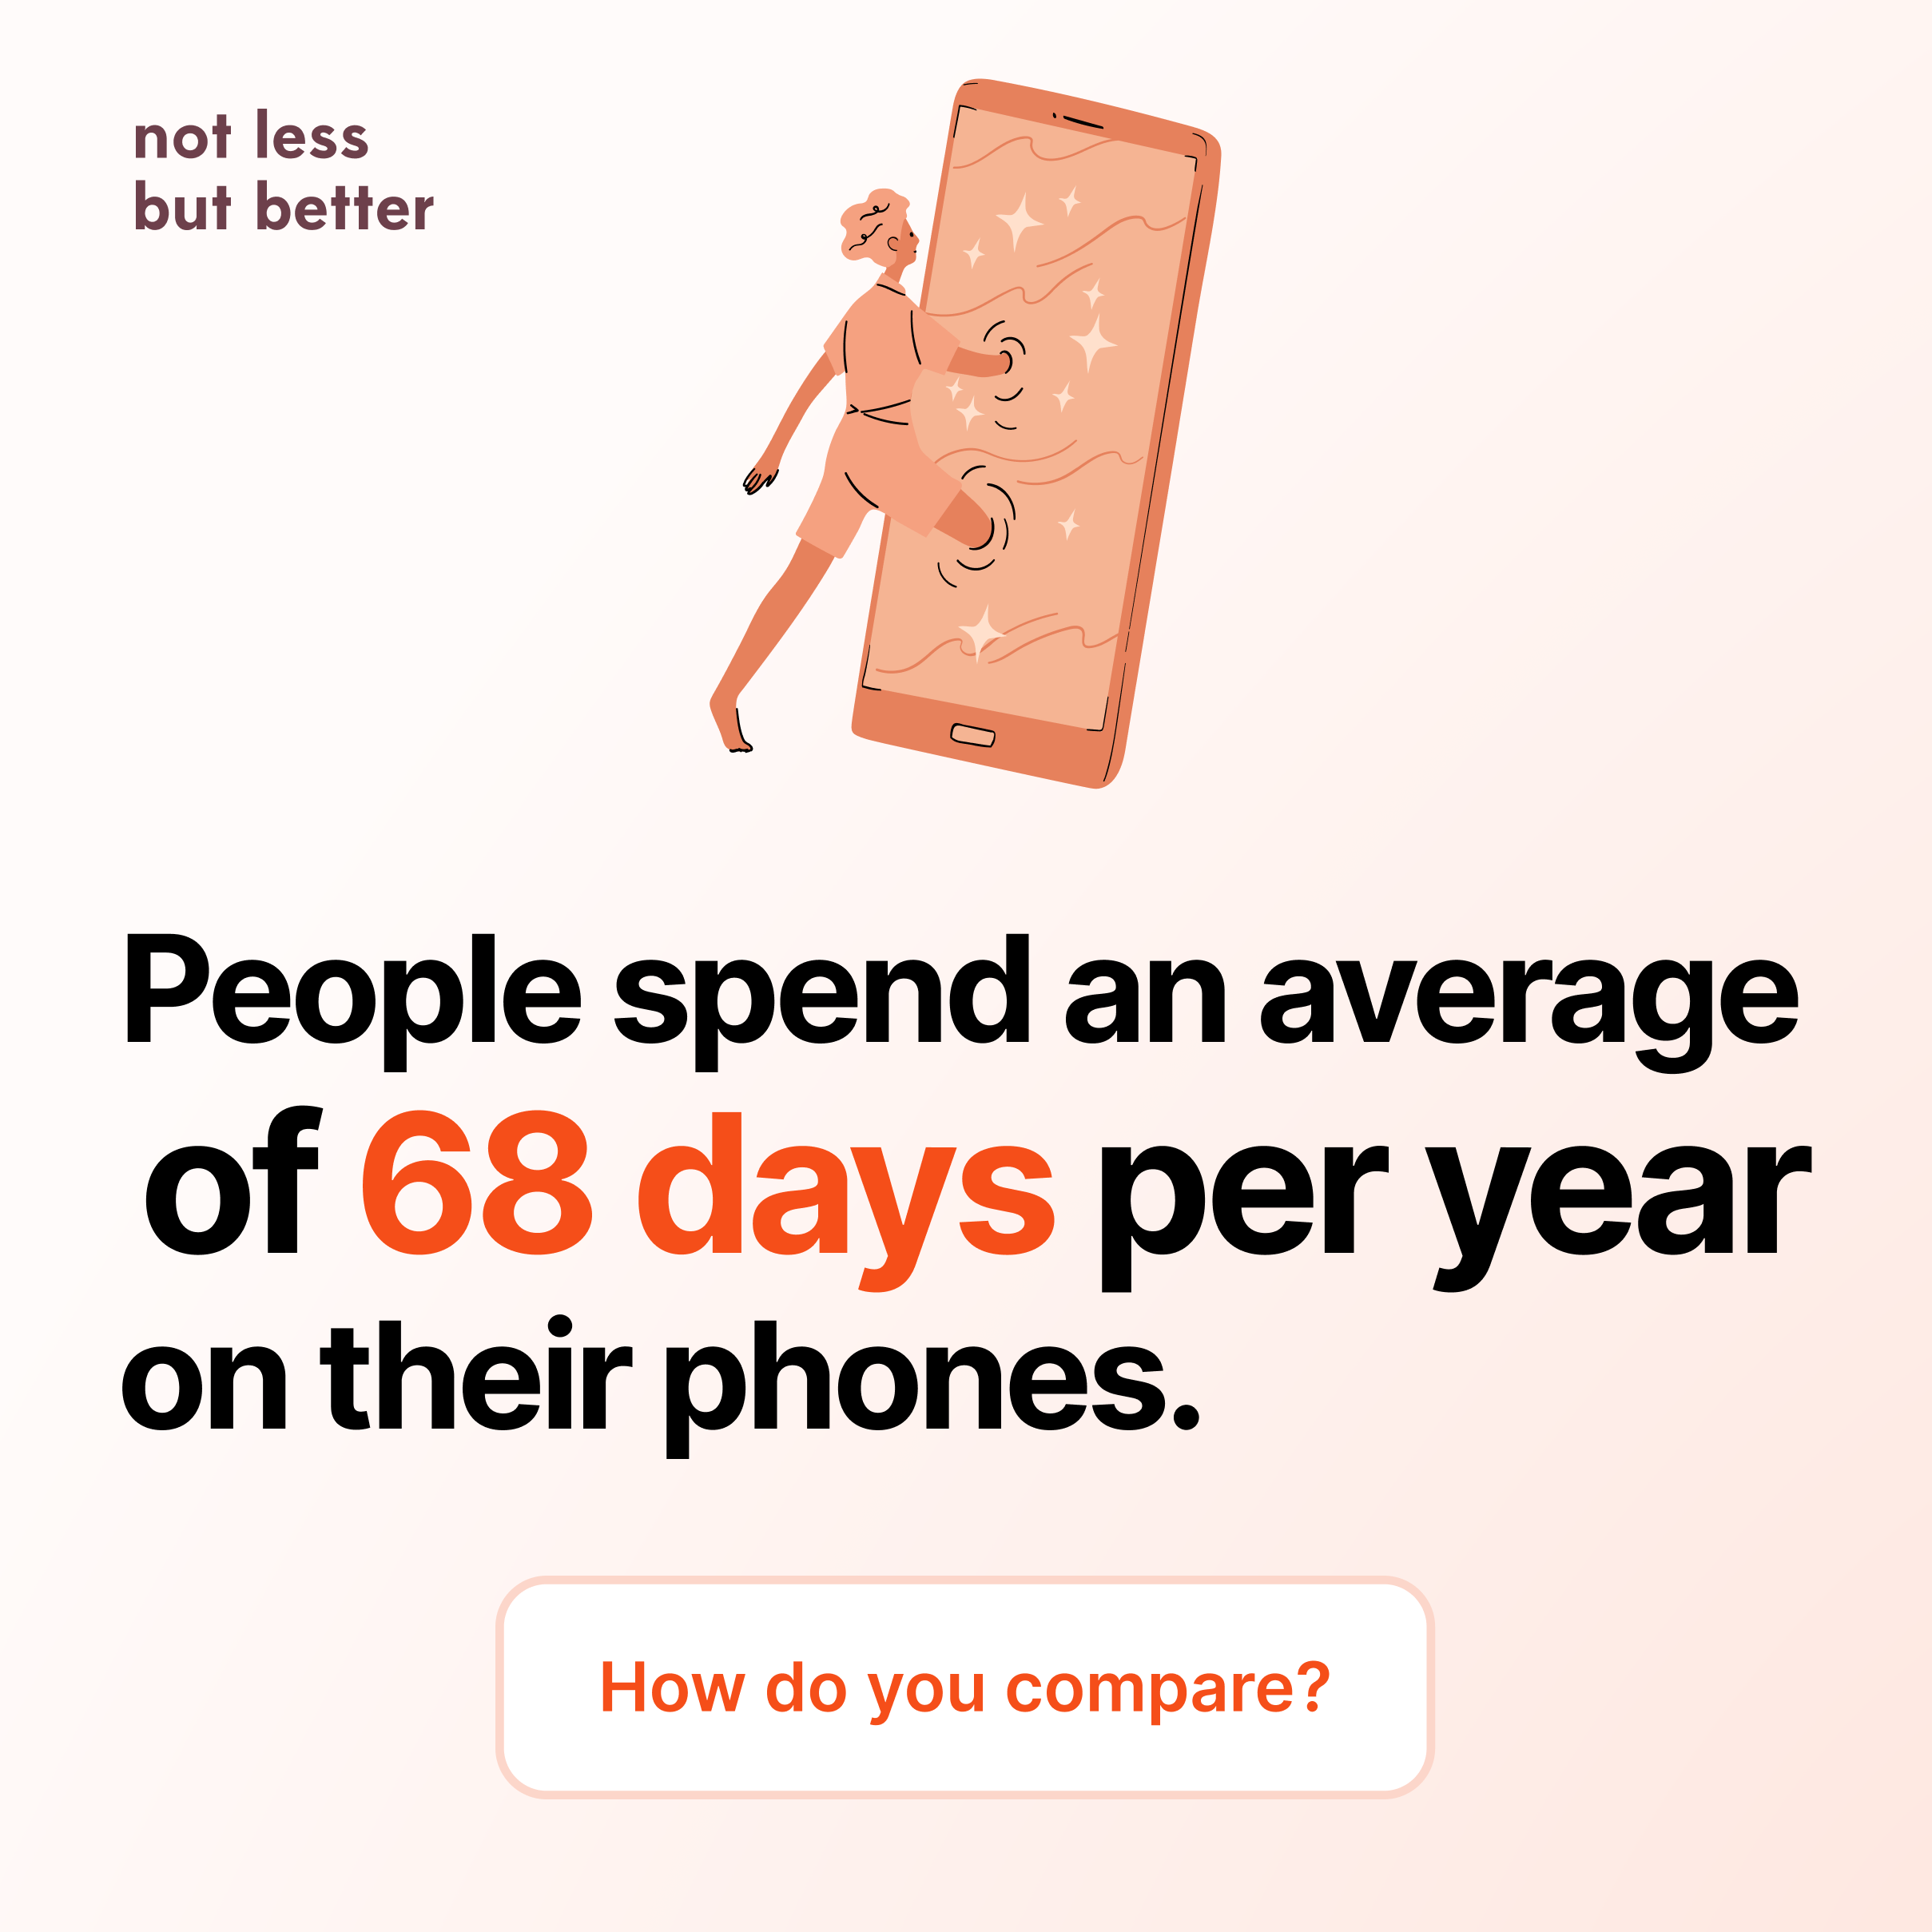 Social media graphic: "people spend an average of 68 days per year on their phones"